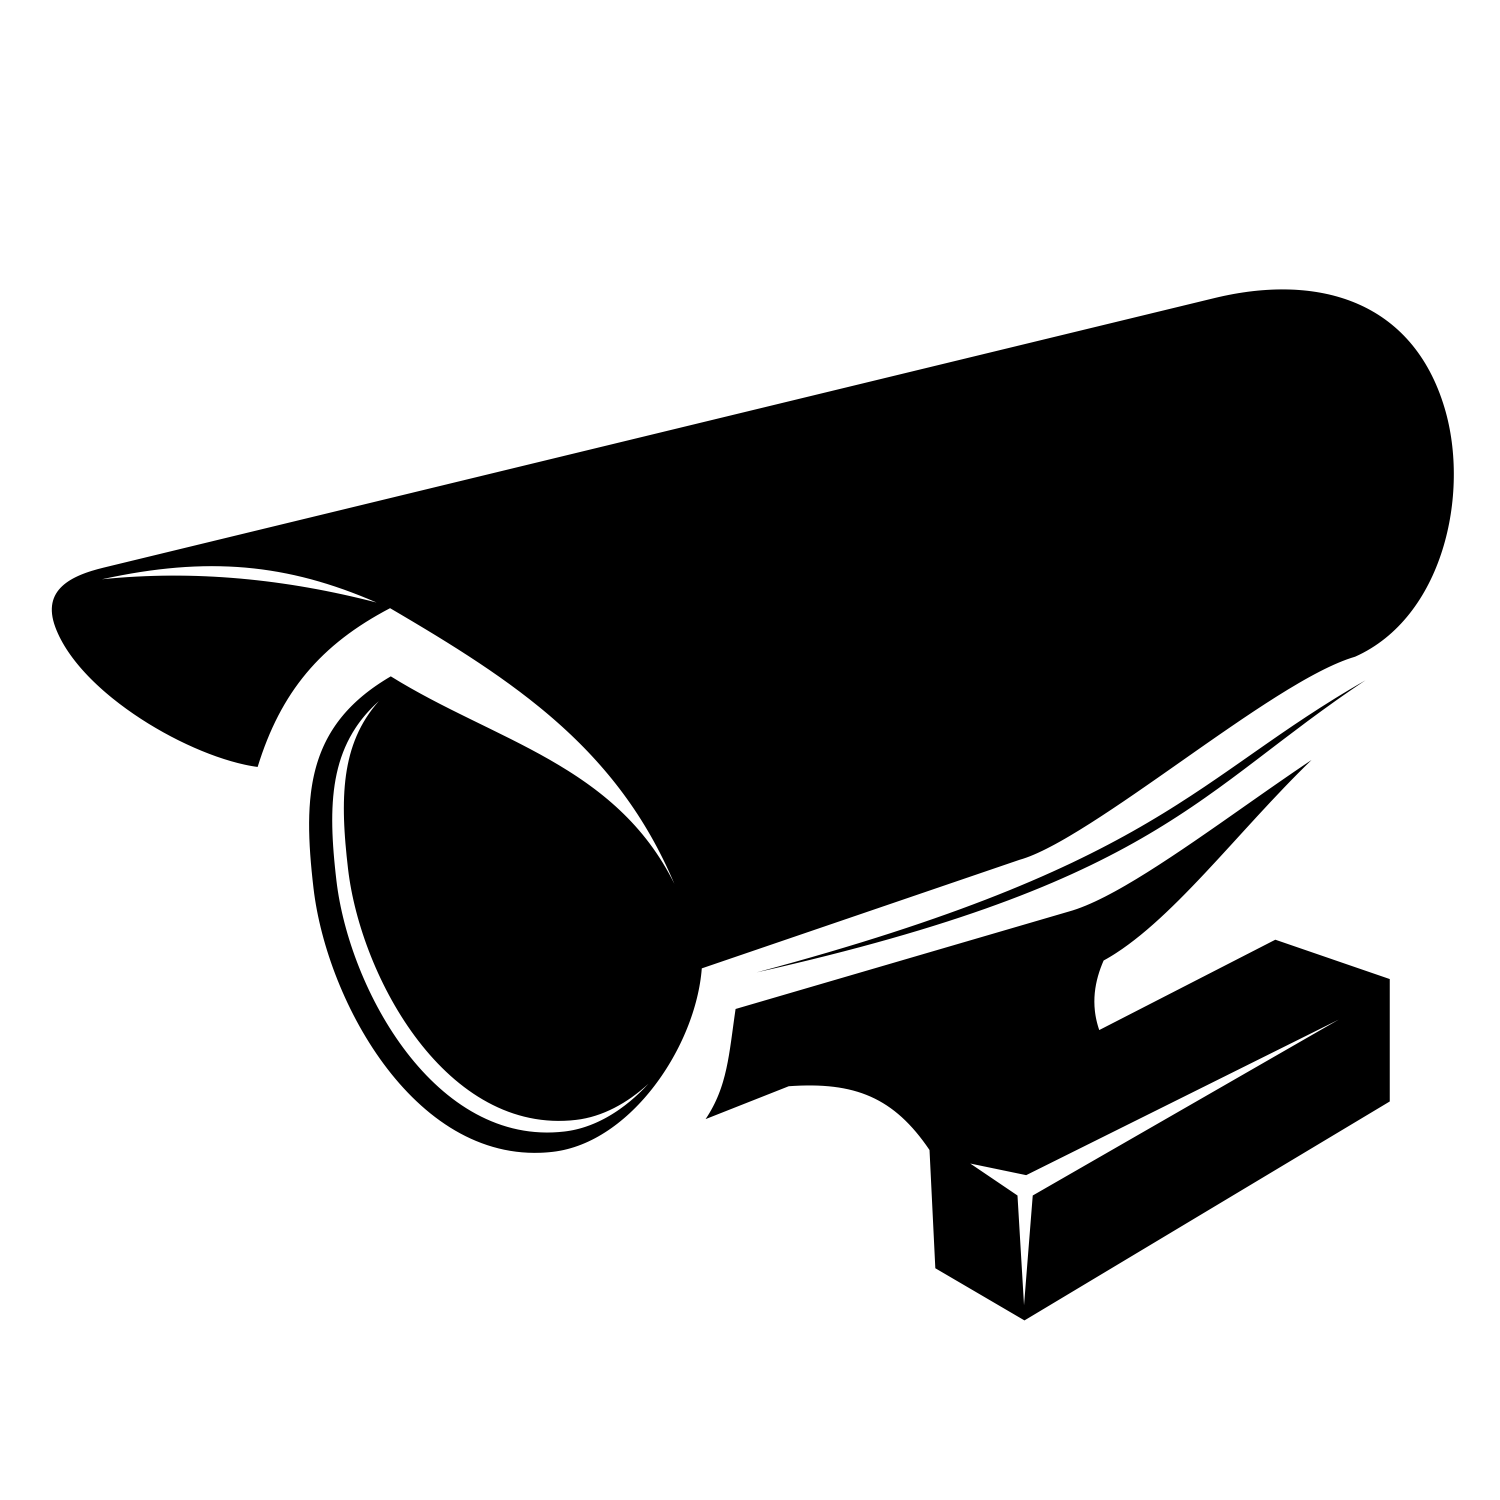 security camera clipart free - photo #25